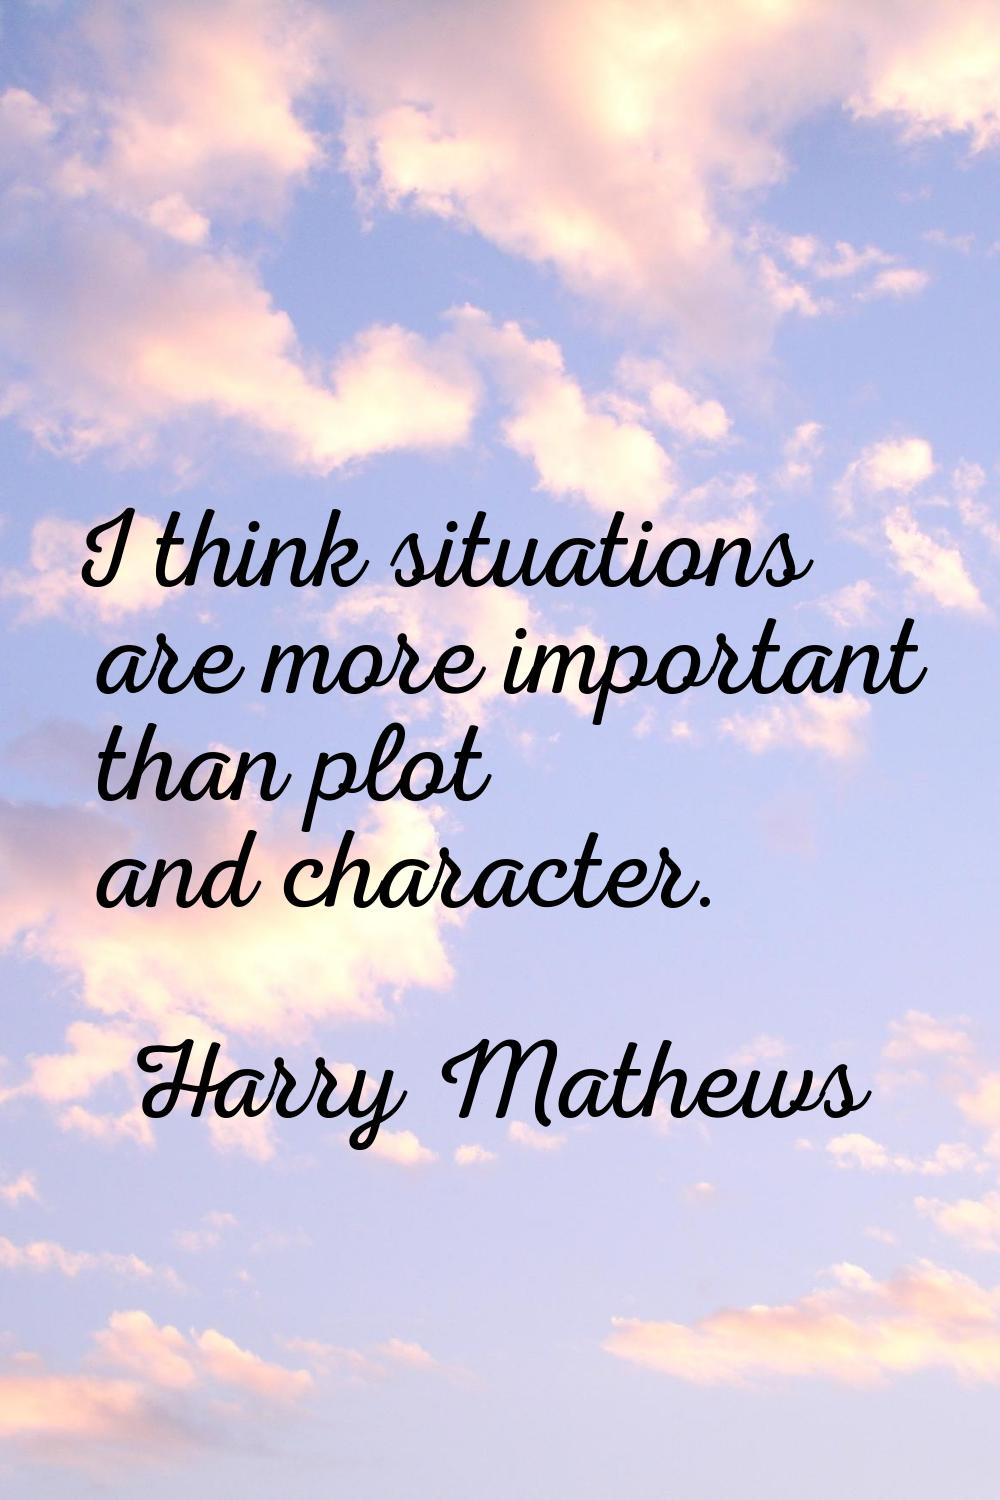 I think situations are more important than plot and character.